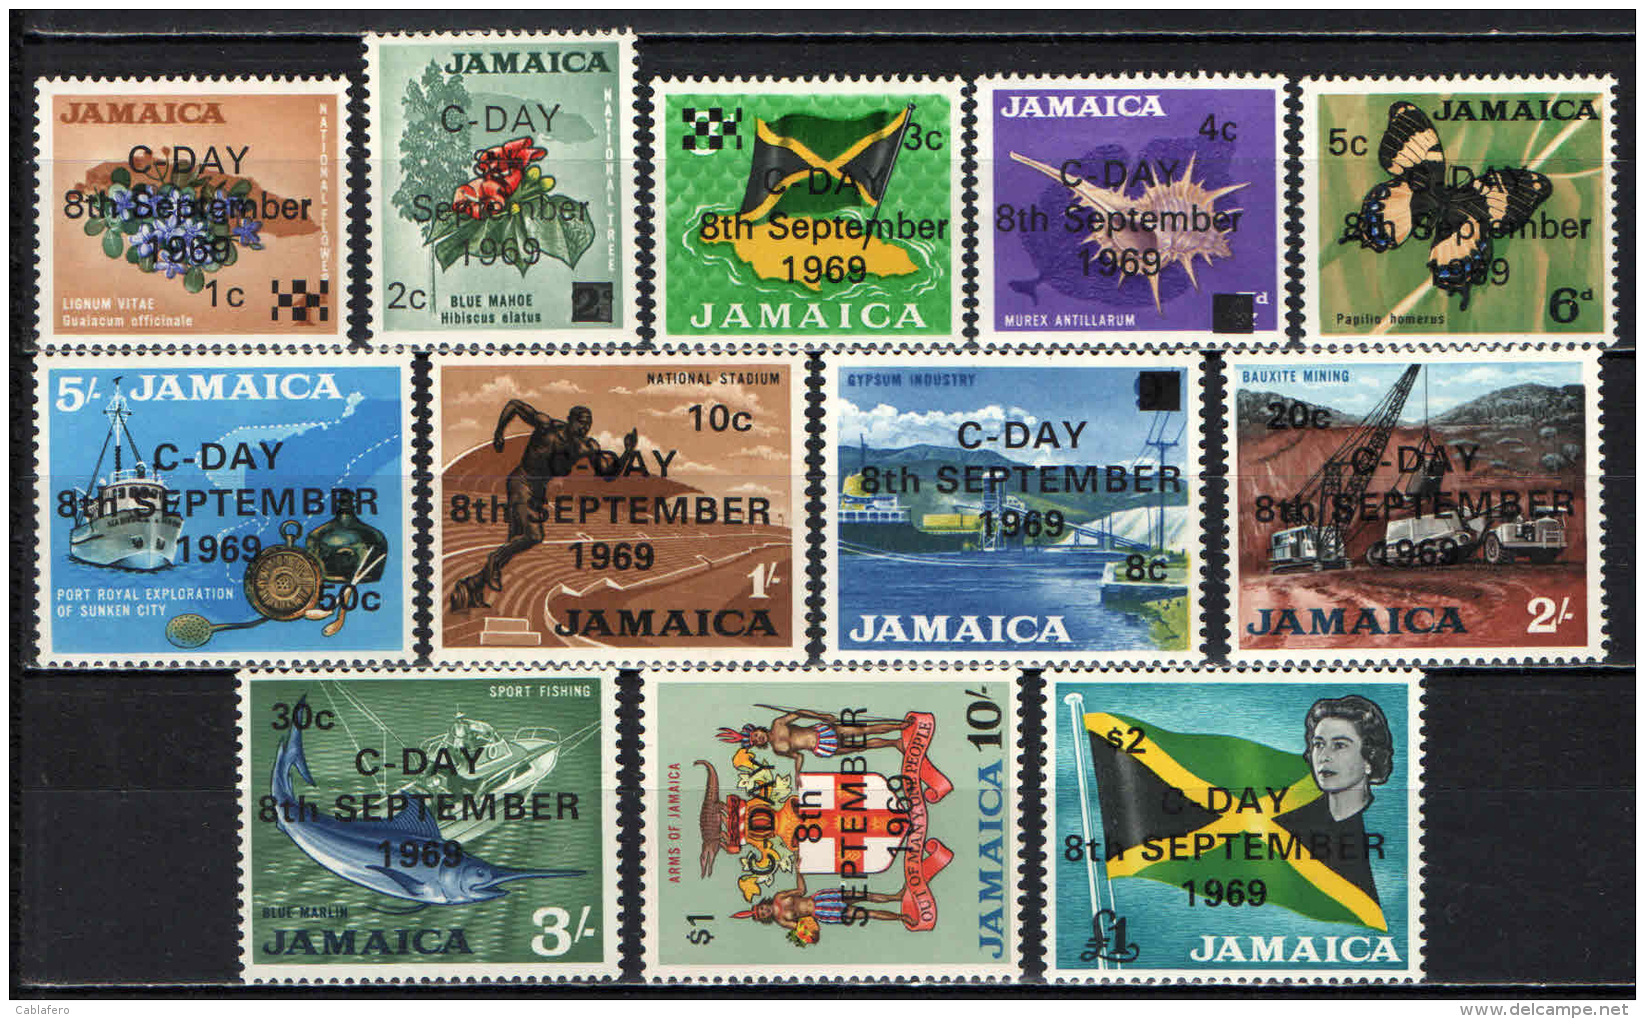 JAMAICA - 1969 - Introduction Of Decimal Currency - " C DAY 8th SEPTEMBER 1969&rdquo; - MH - Giamaica (1962-...)